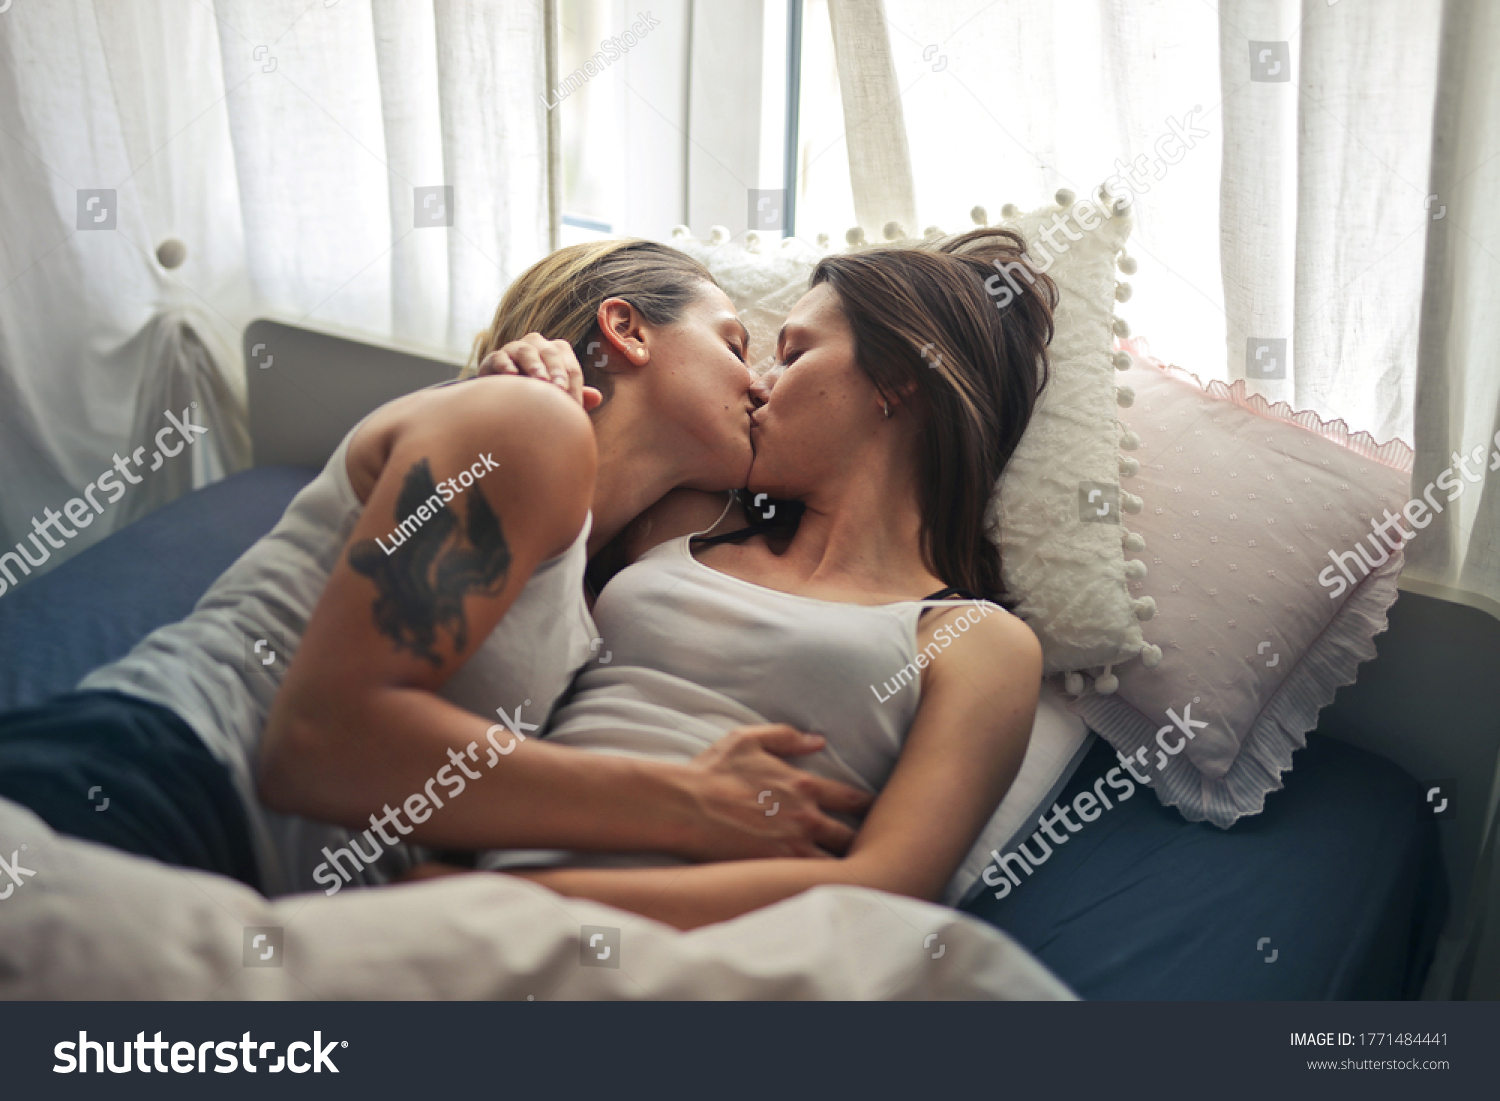 Lesbians Kissing On Bed